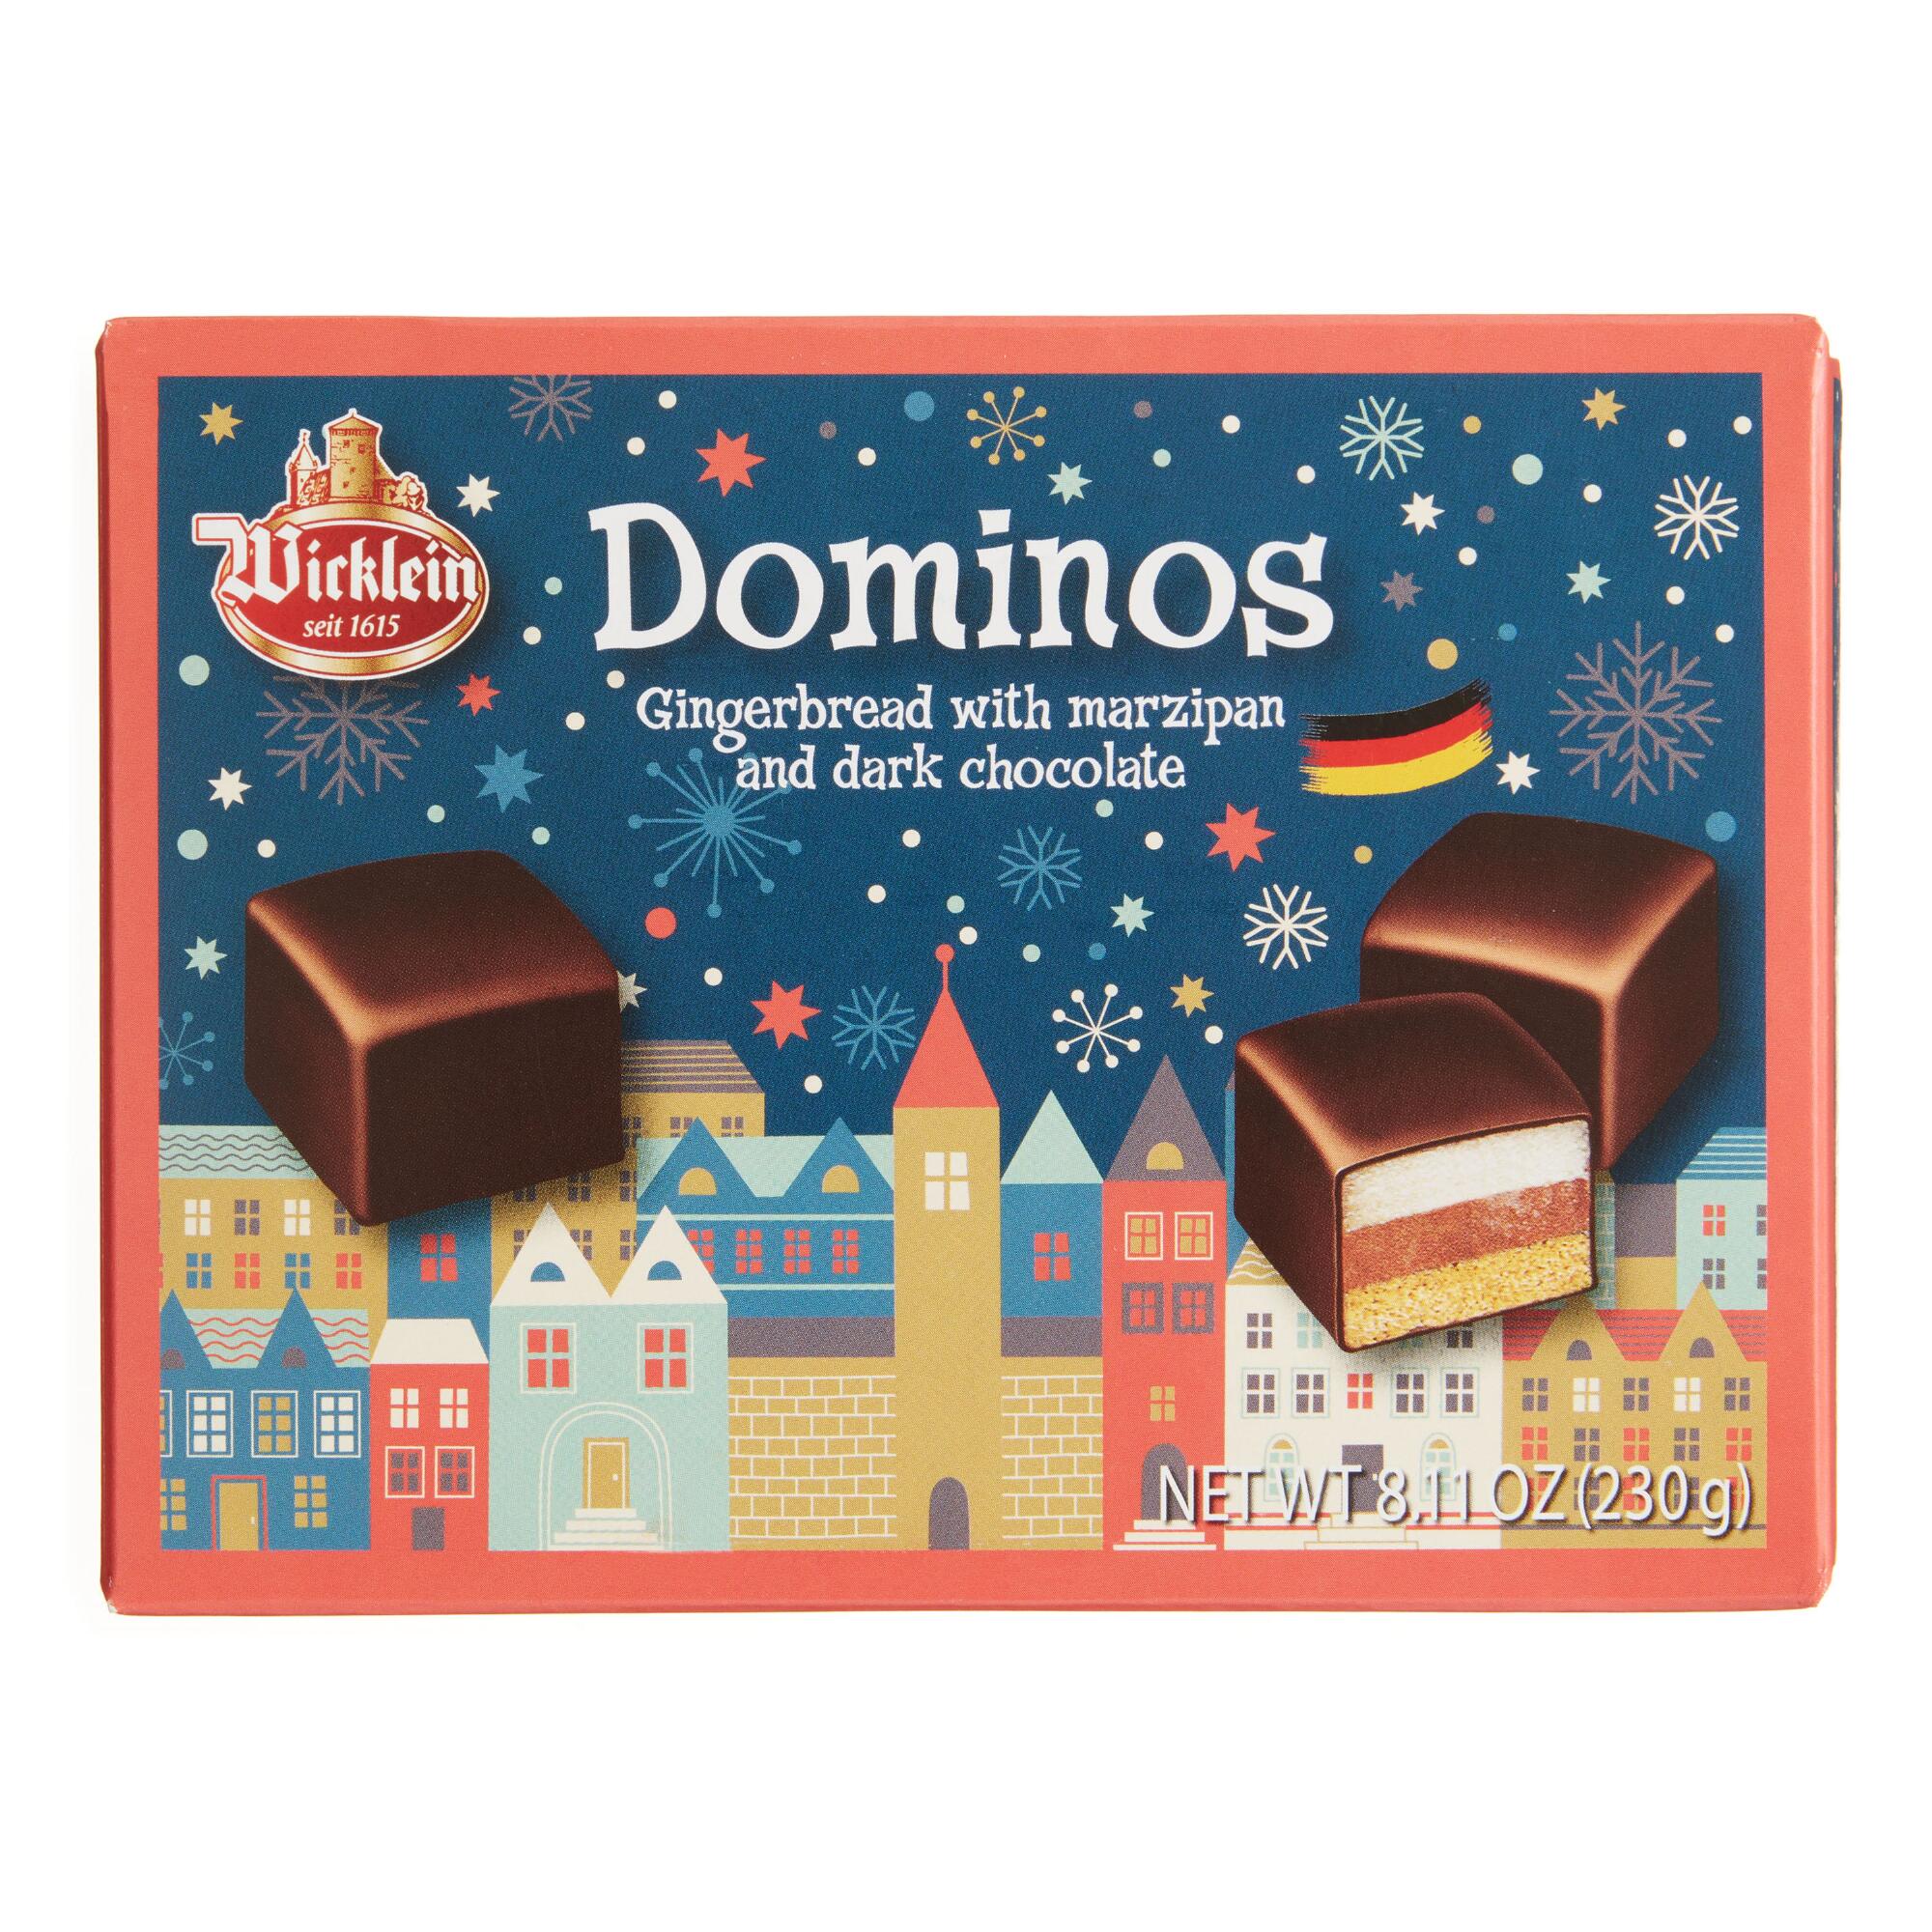 Wicklein Dark Chocolate Gingerbread and Marzipan Dominos by World Market